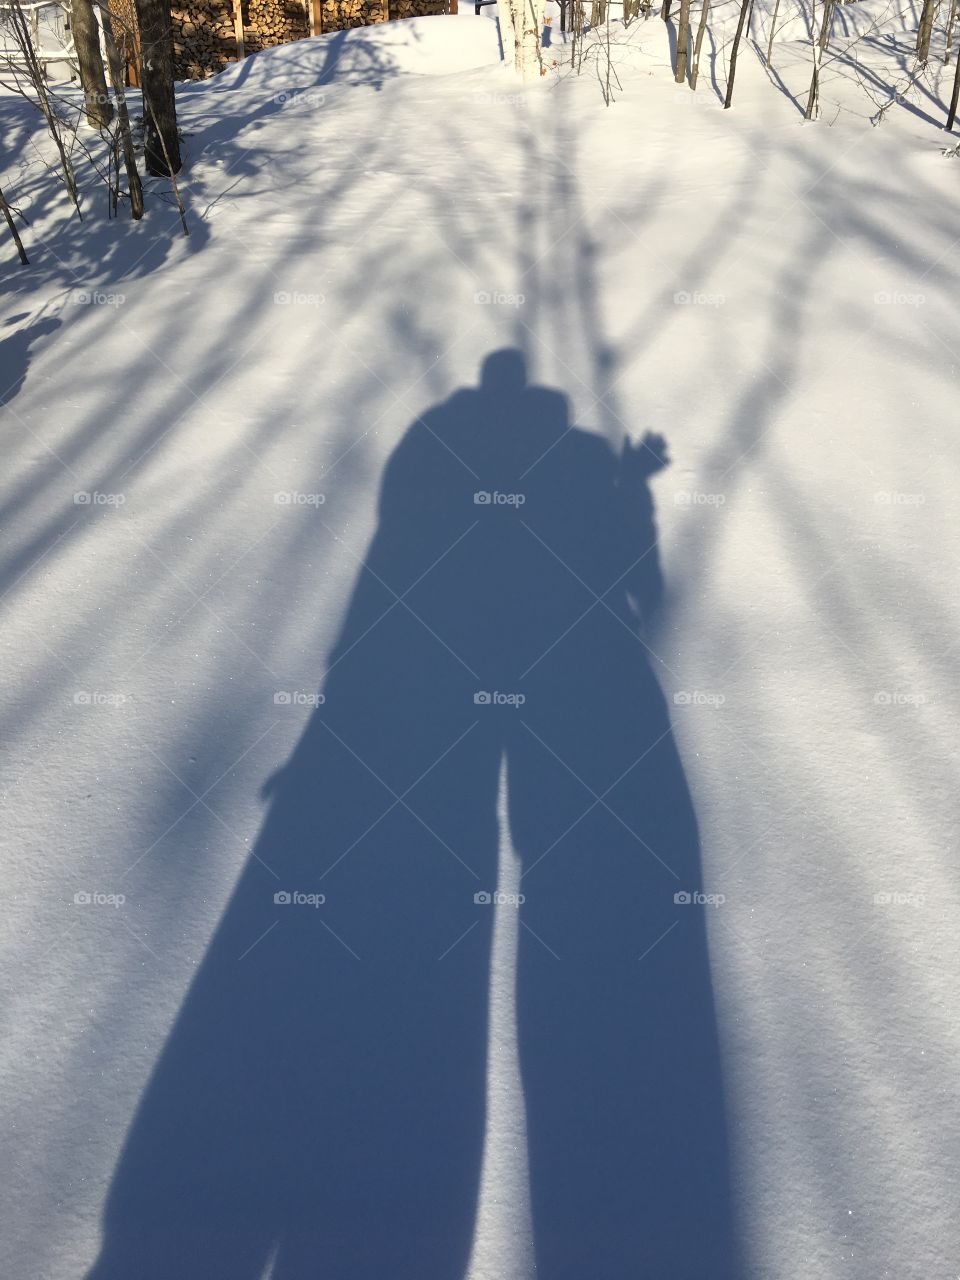 wife and i out on the snowshoe trail taking picture of our silhouette 